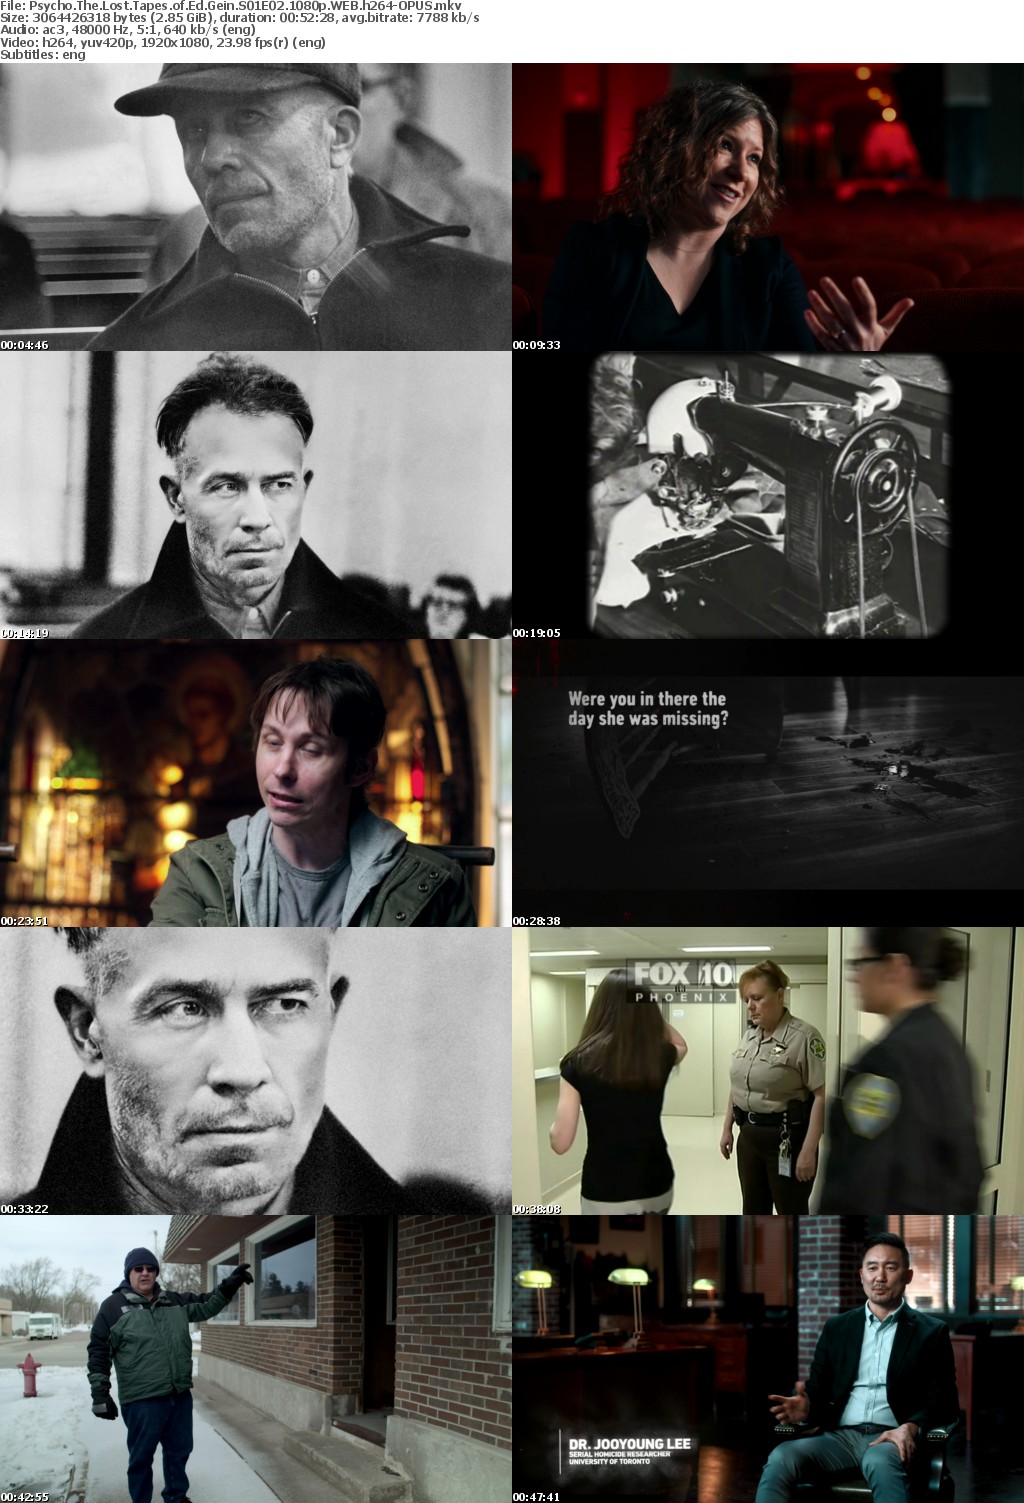 Psycho The Lost Tapes of Ed Gein S01E02 1080p WEB h264-OPUS